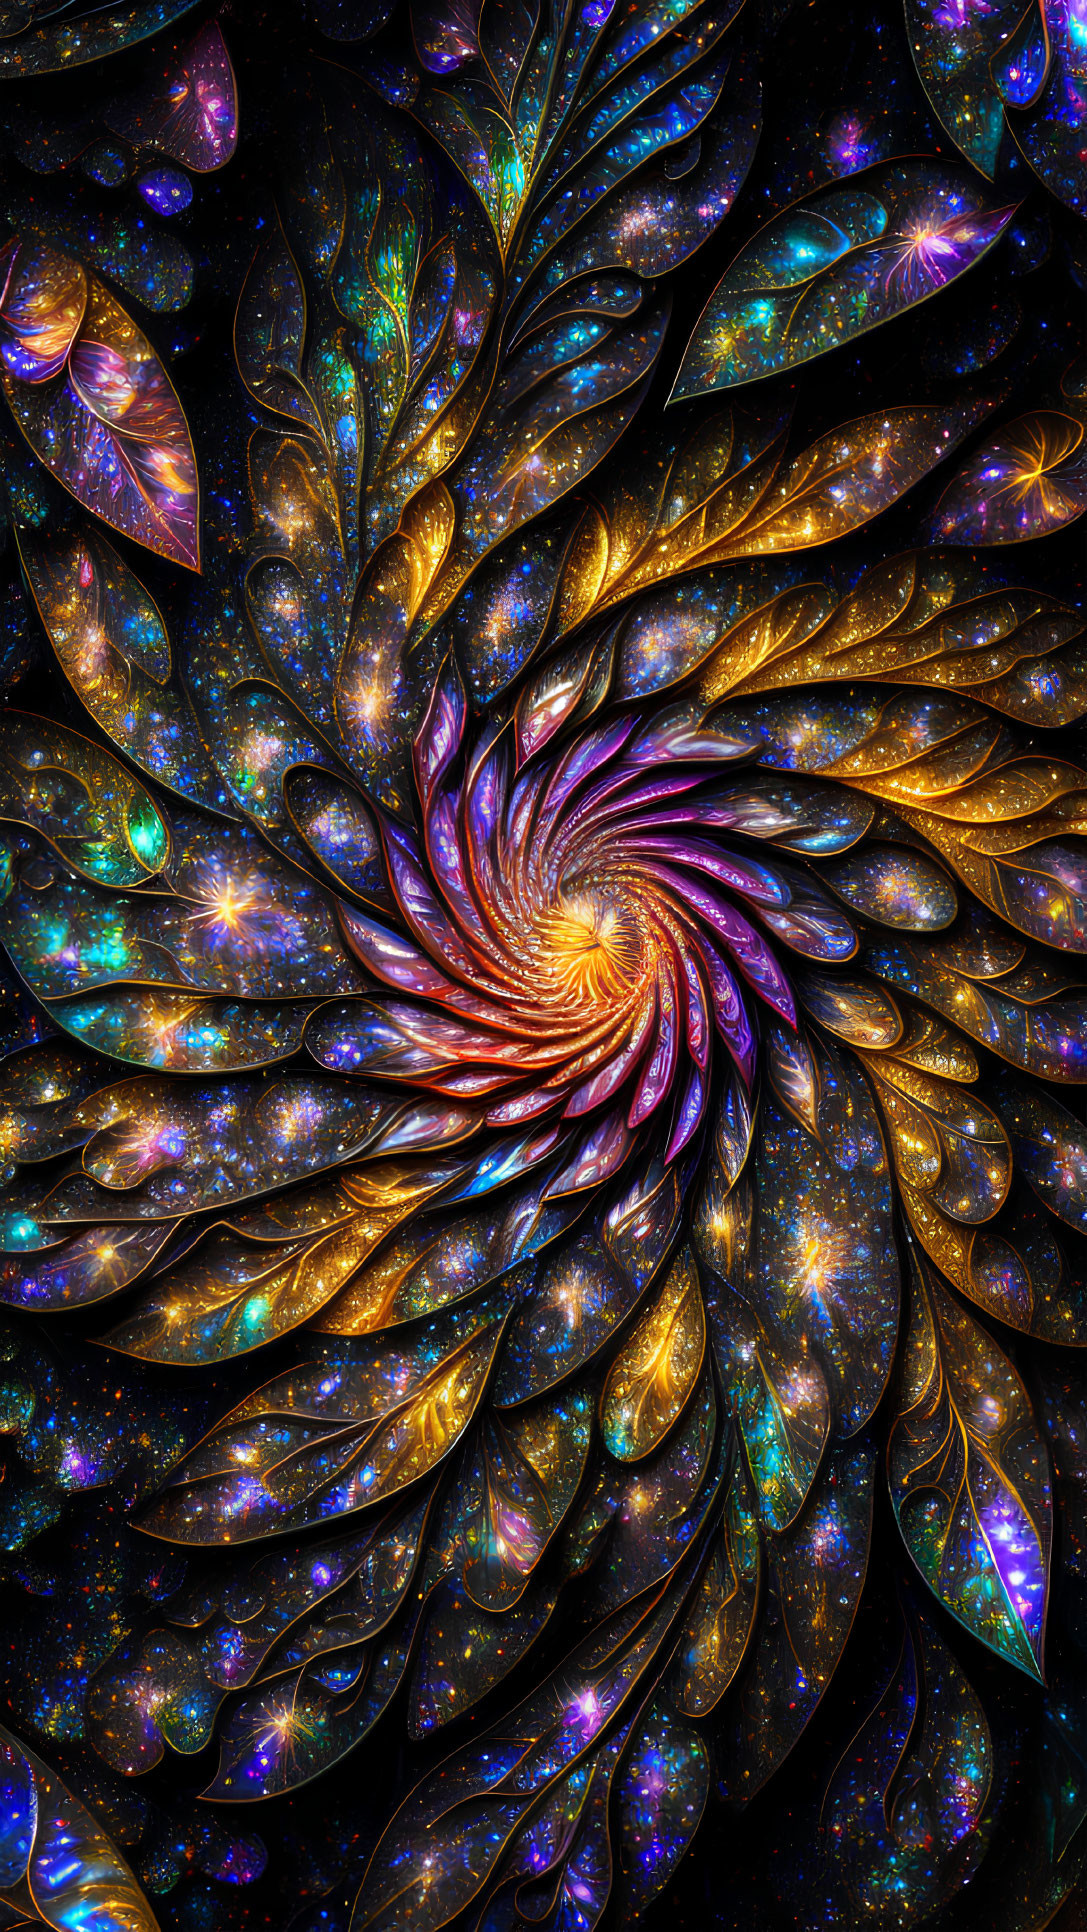 Colorful digital artwork: Cosmic spiral pattern in gold and blue hues, resembling a stylized galaxy with